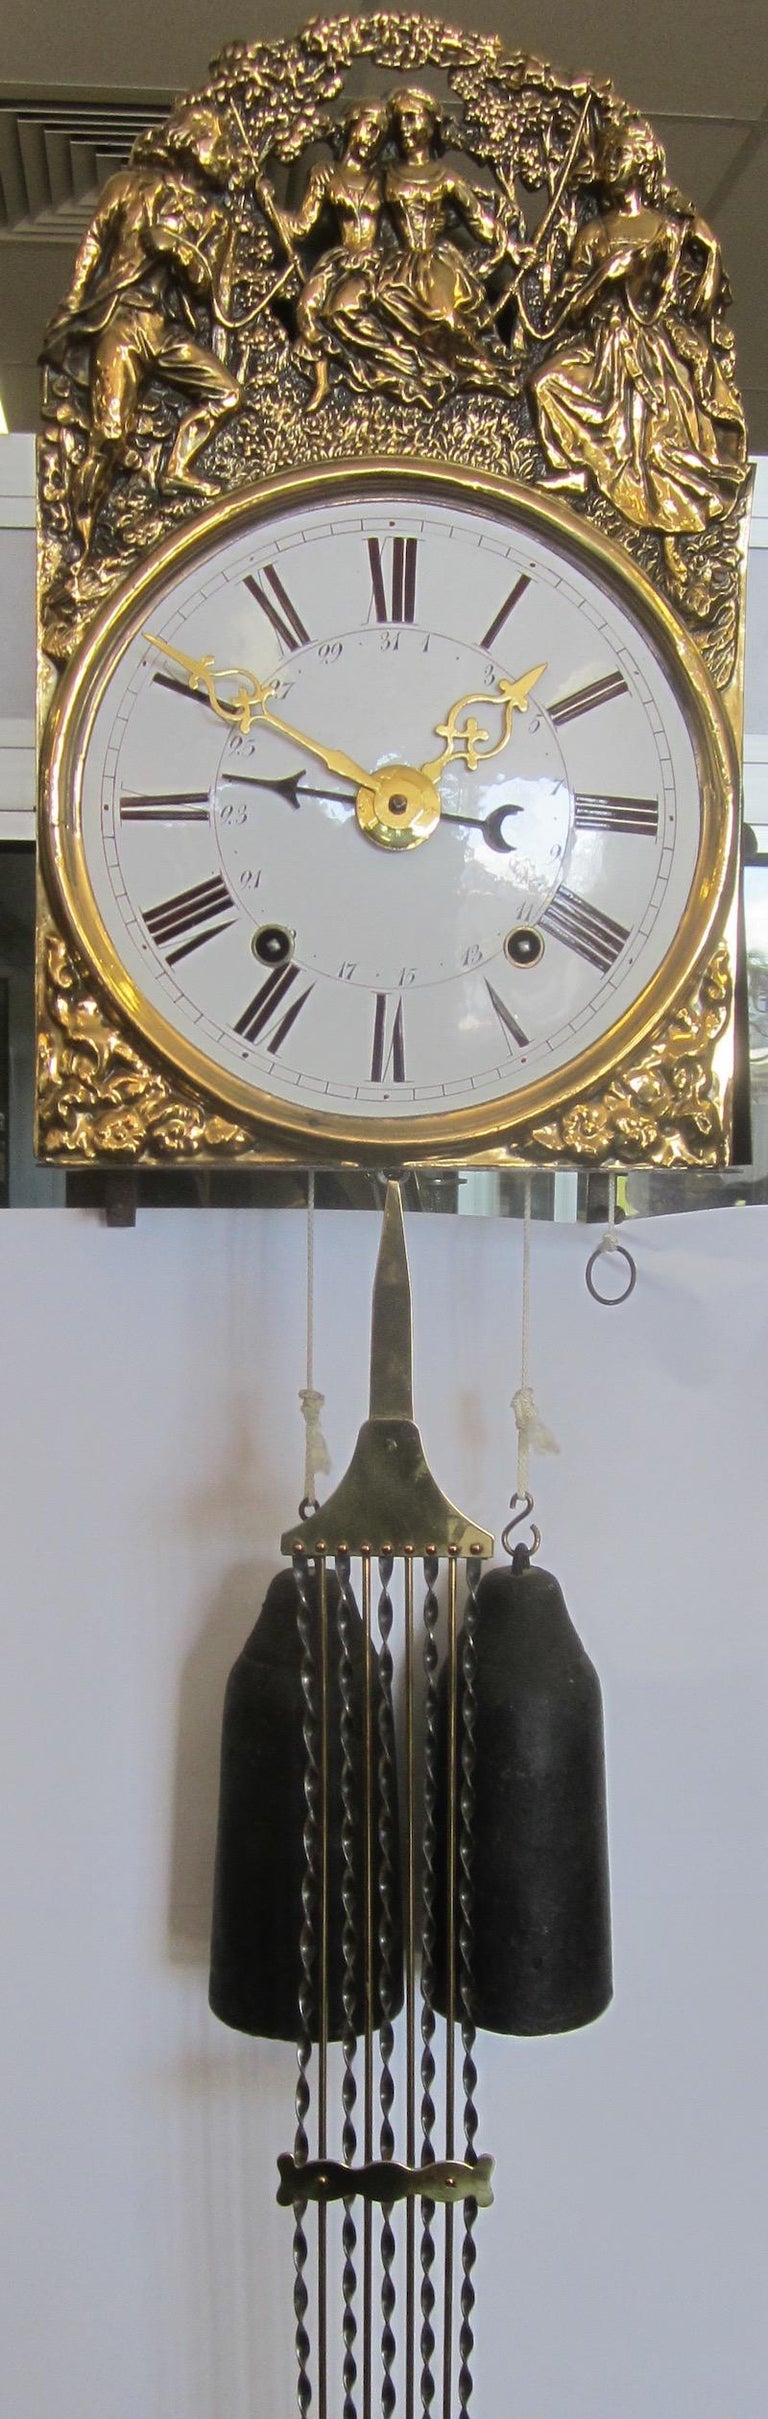 French Provincial French Comtoise Repeater Wall Clock For Sale